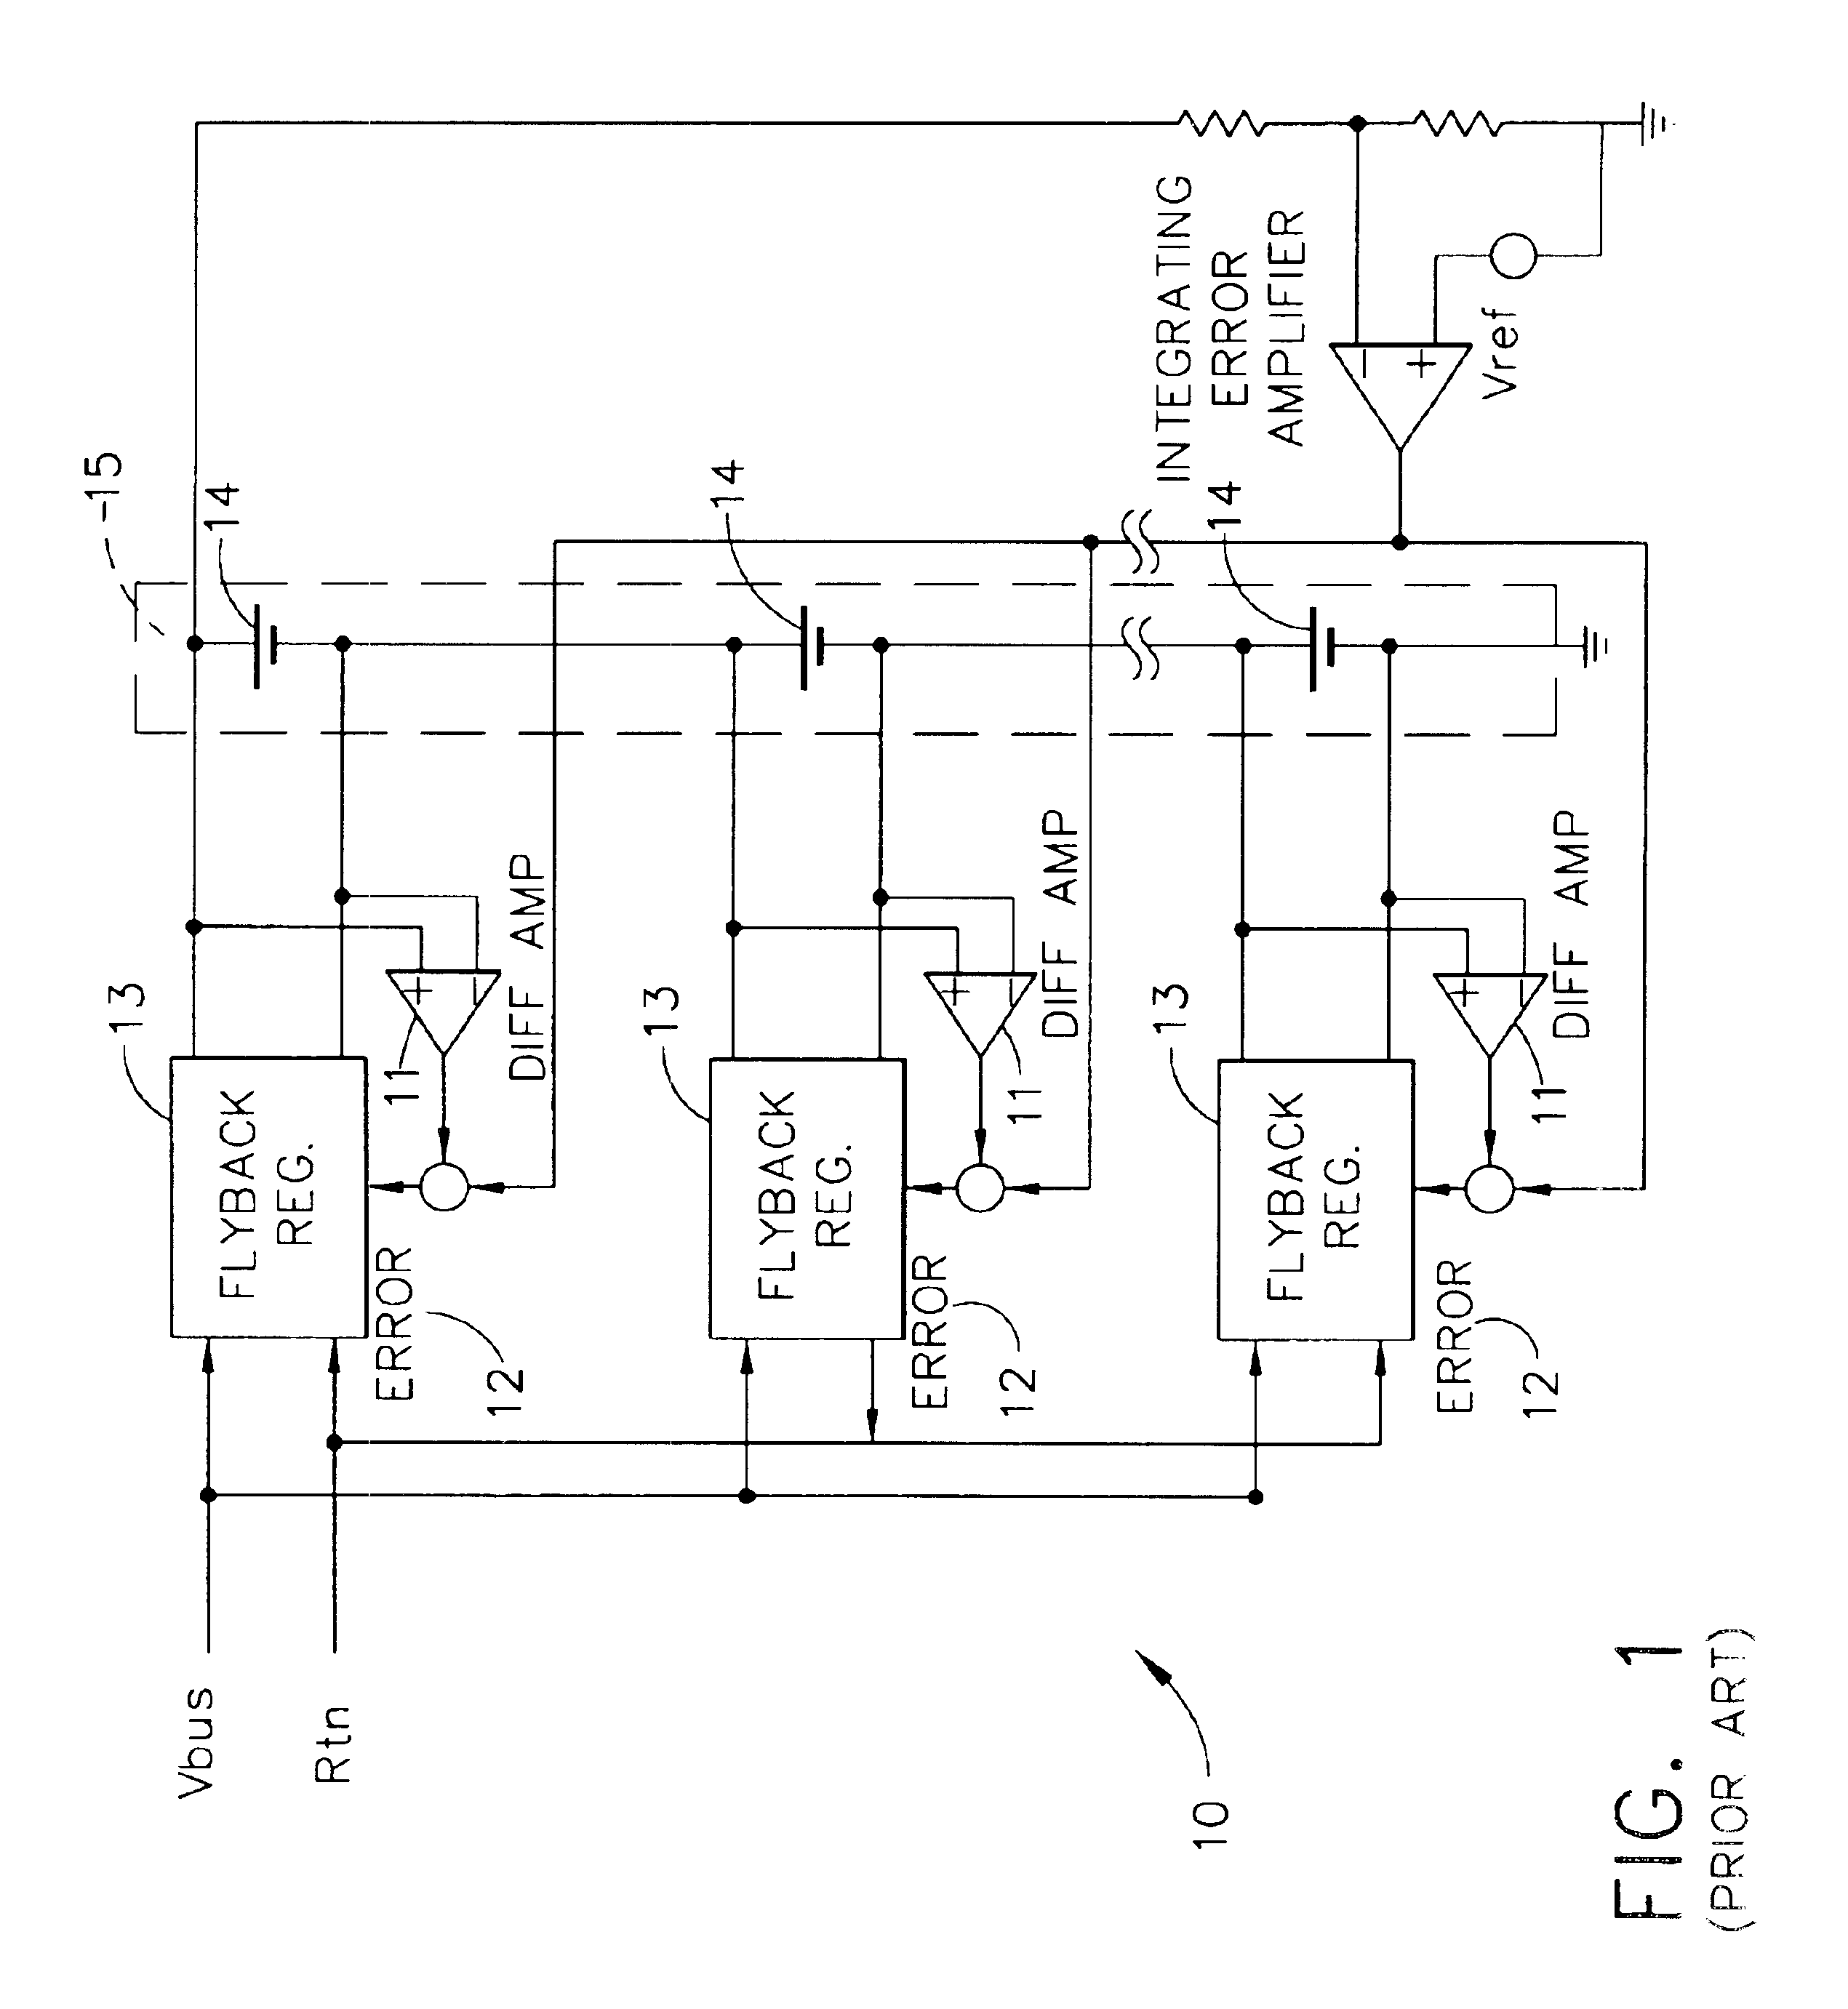 Autonomous battery cell balancing system with integrated voltage monitoring